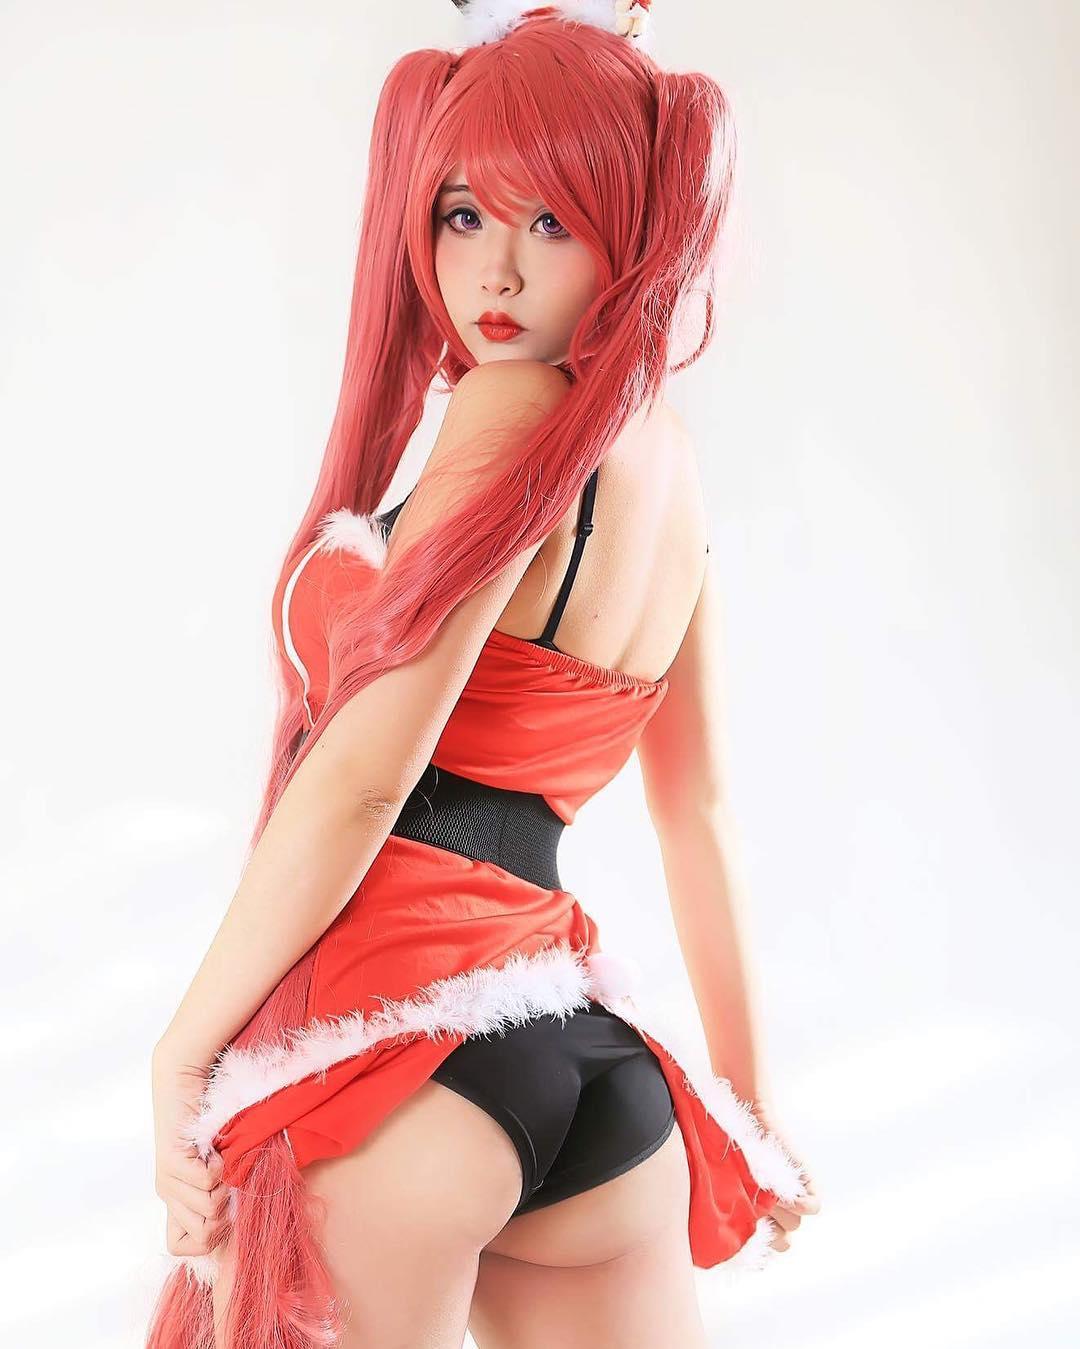 Hana Bunny Cute Cosplay Picture and Photo